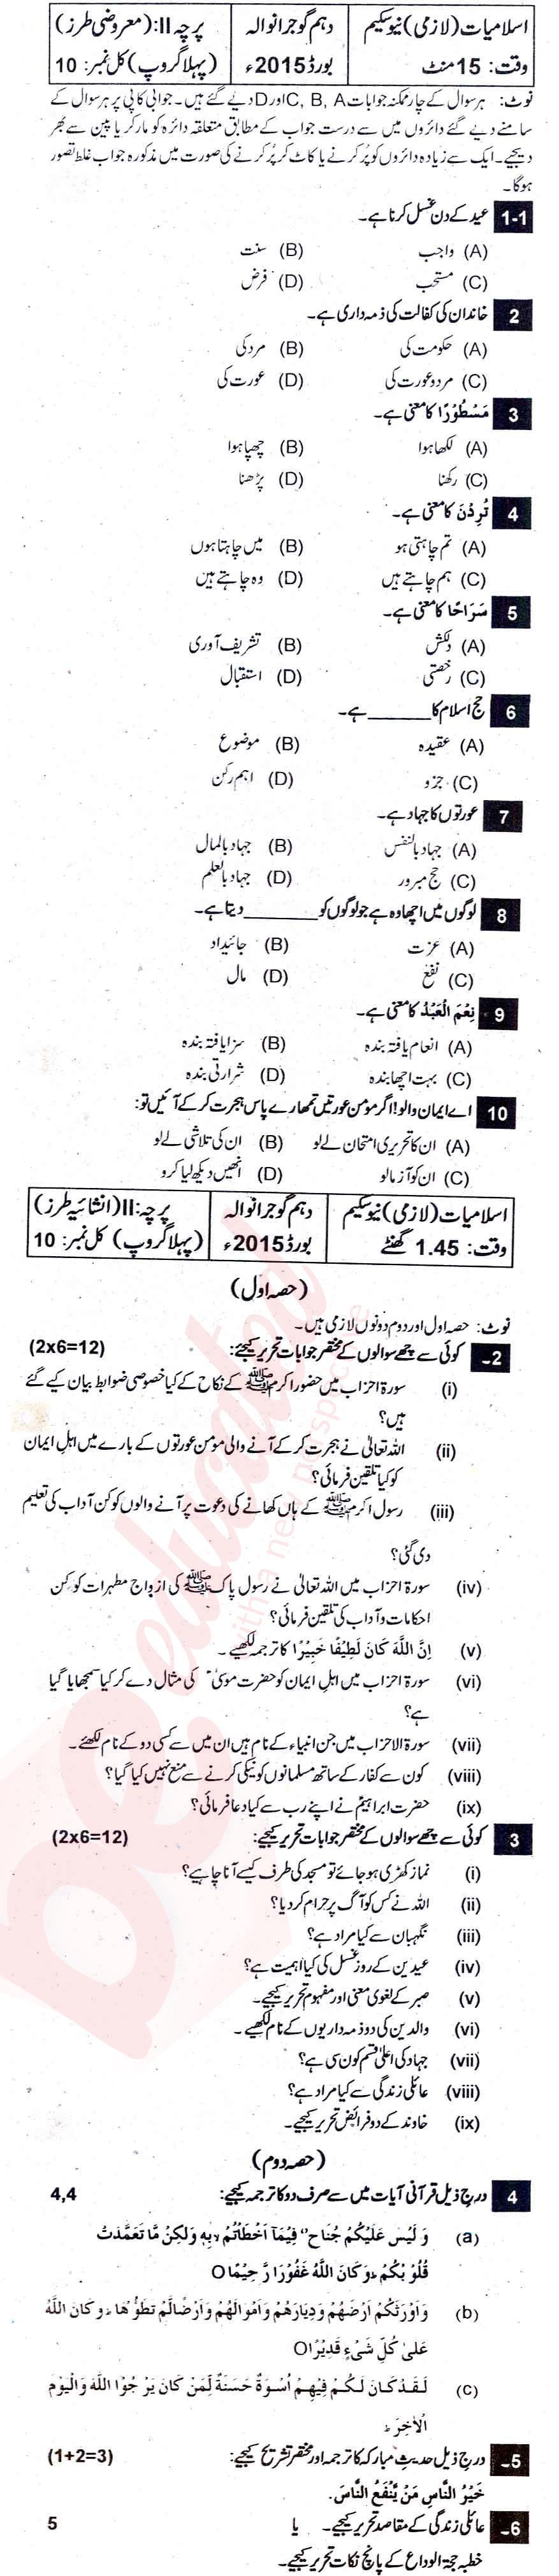 Islamiat (Compulsory) 10th class Past Paper Group 1 BISE Gujranwala 2015